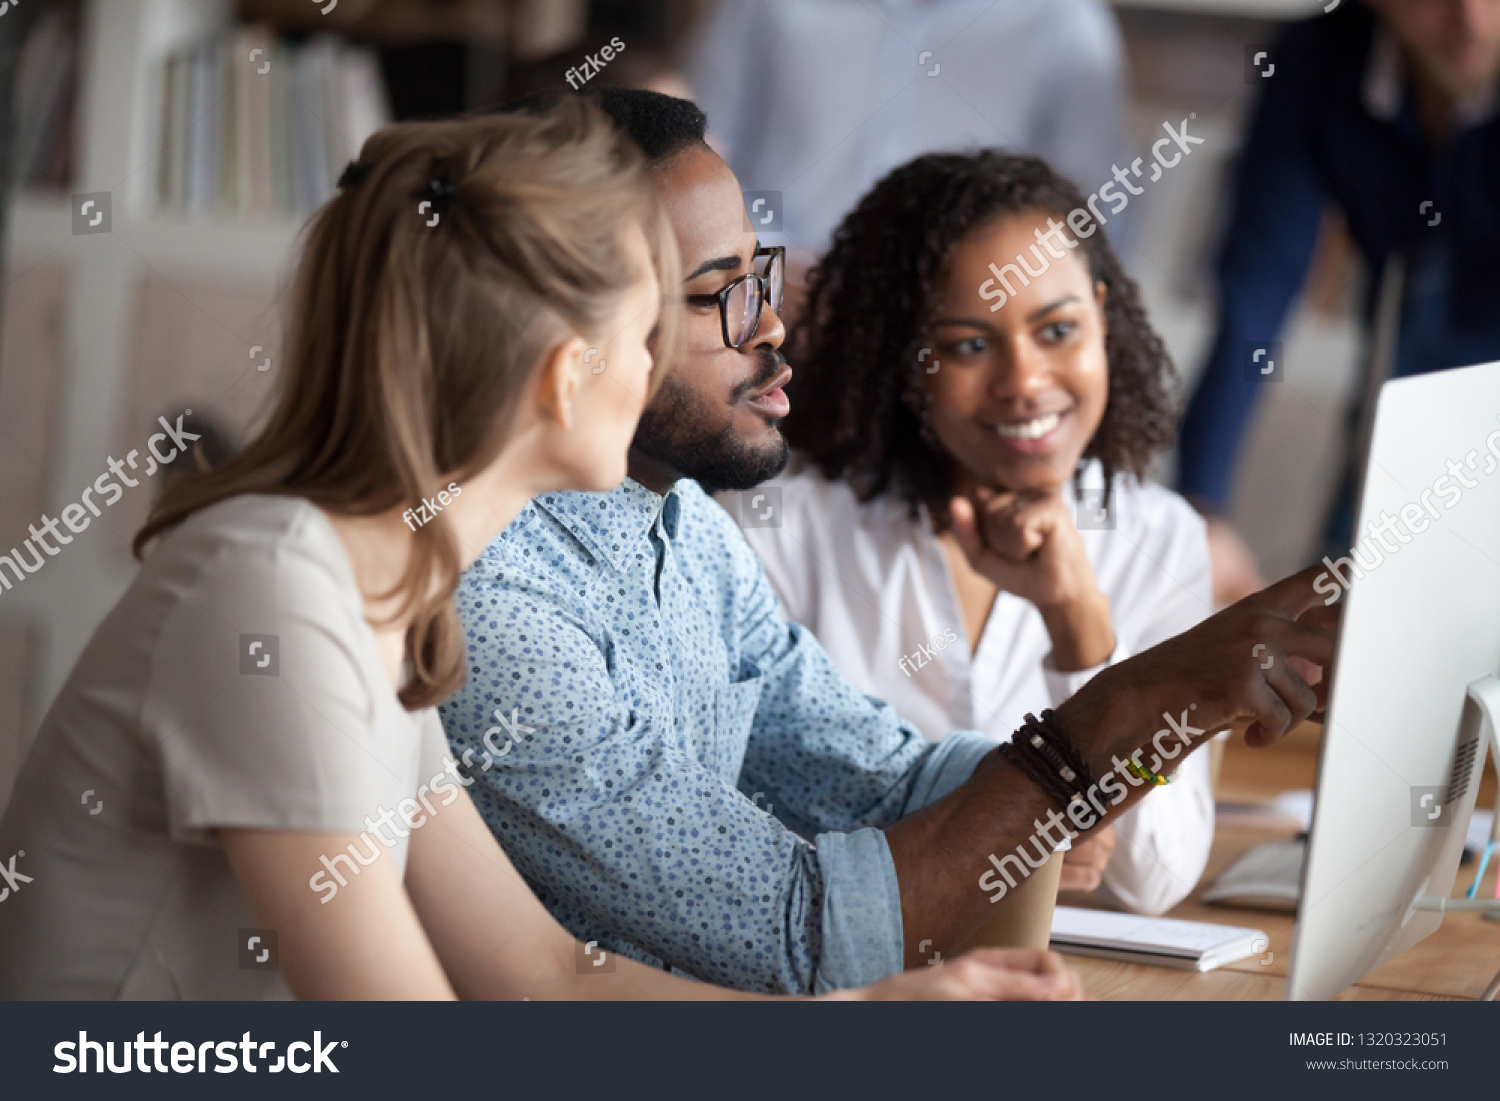 Diverse businesspeople working in shared office, focus on black american team leader sitting at desk together with females colleagues, mentor helps understand research data company corporate program #1320323051